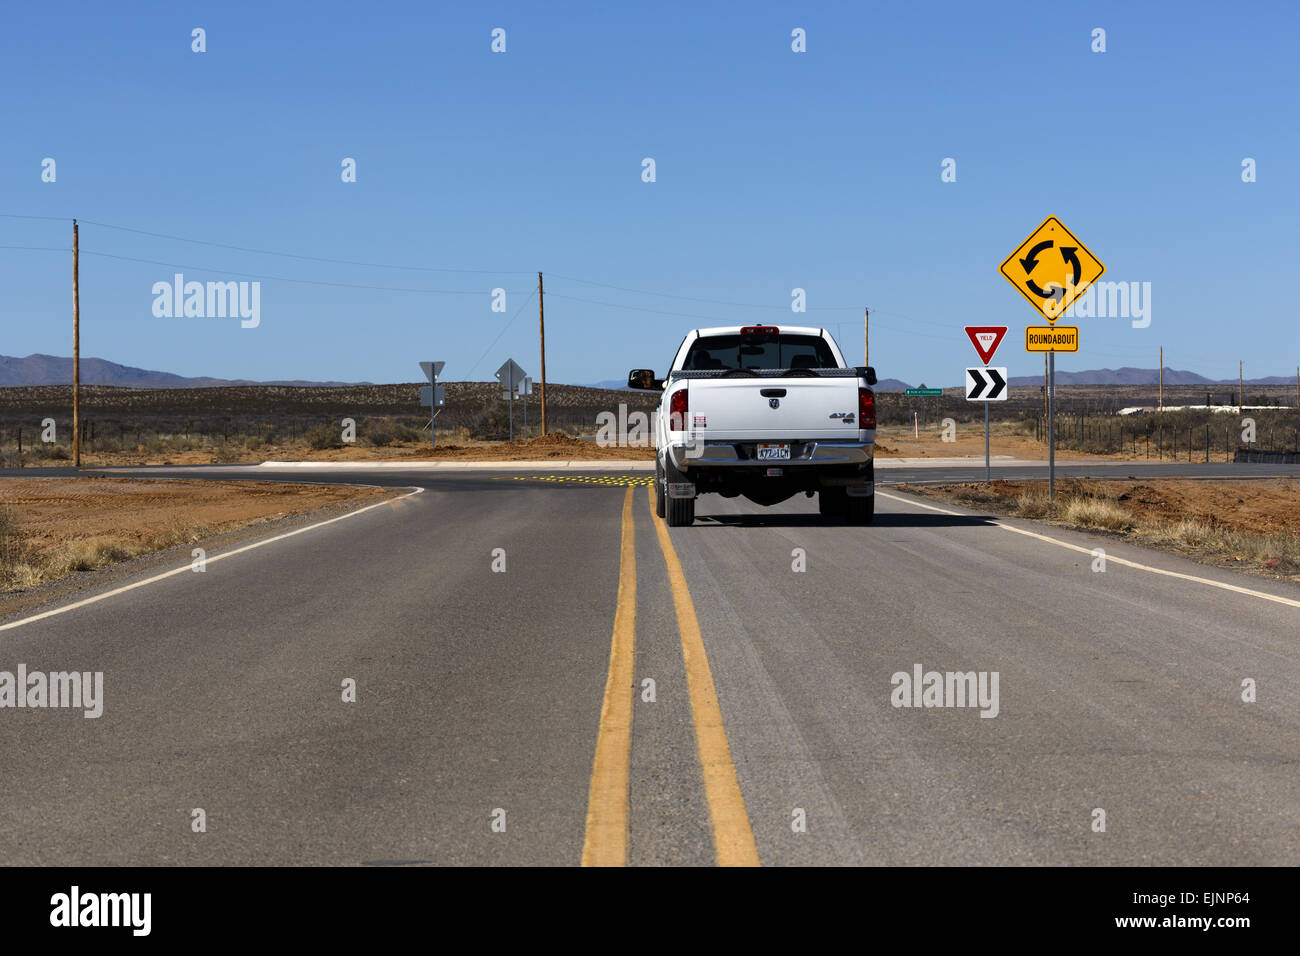 Rear view of a large white Dodge Ram Truck approaching a roundabout located in the middle of a deserted section of road in New Mexico USA Stock Photo